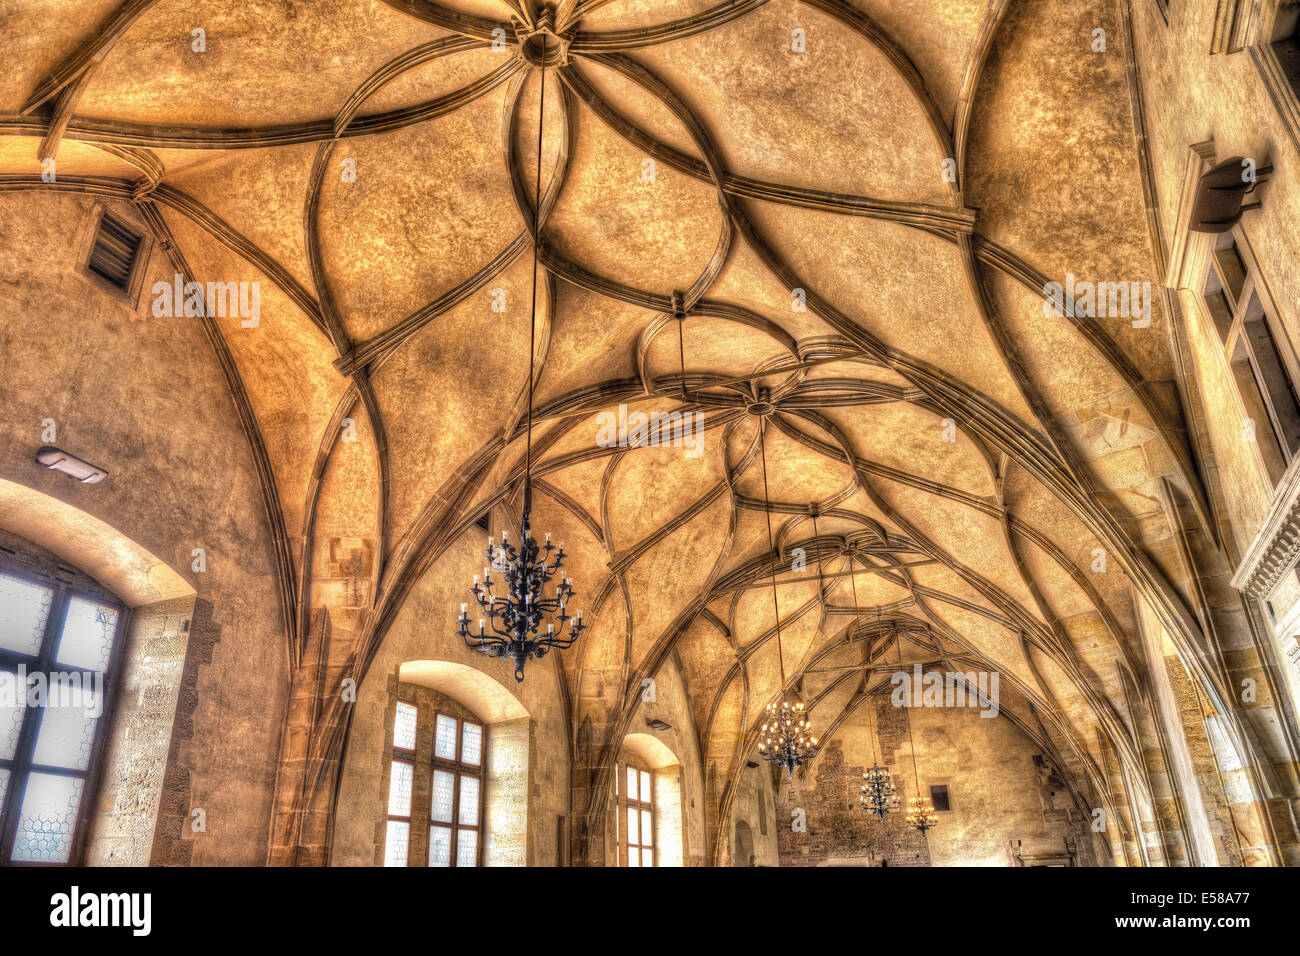 Ceiling of the Vladislav Hall in The Old Royal Palace, Prague Stock Photo